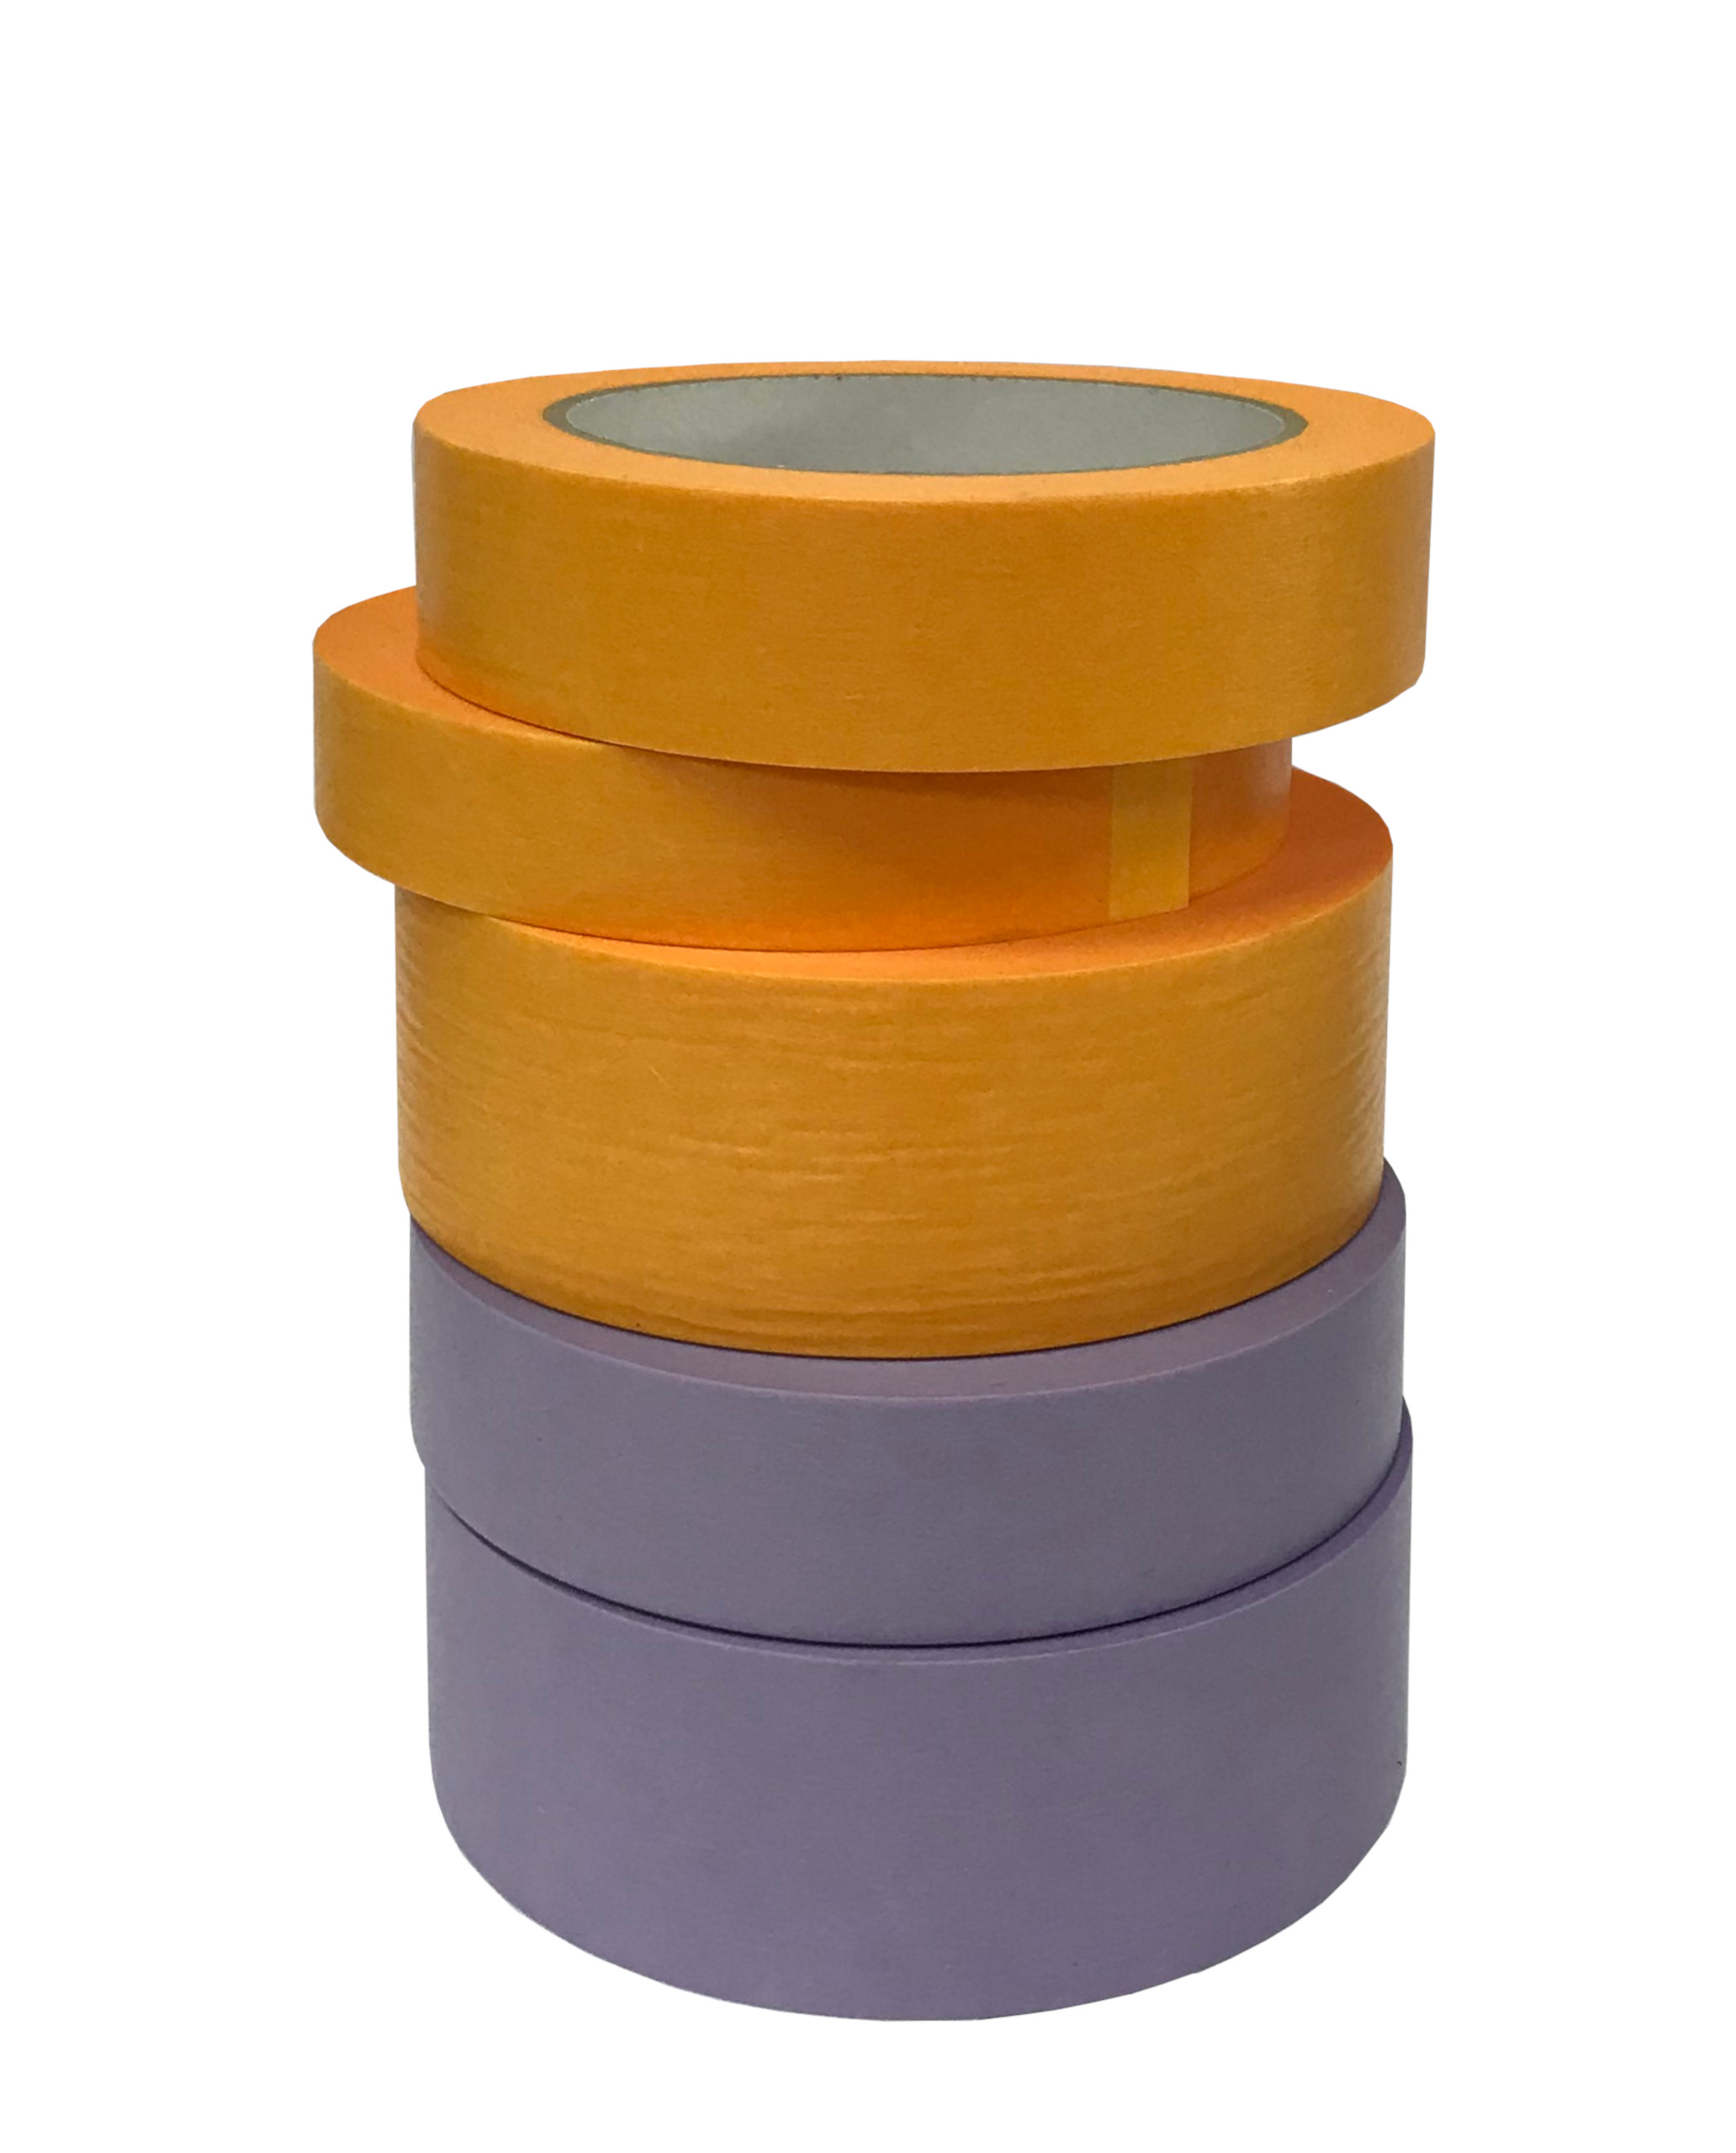 Yellow gold Washi gele tape of Violet lila Washi (delicate) tape per rol